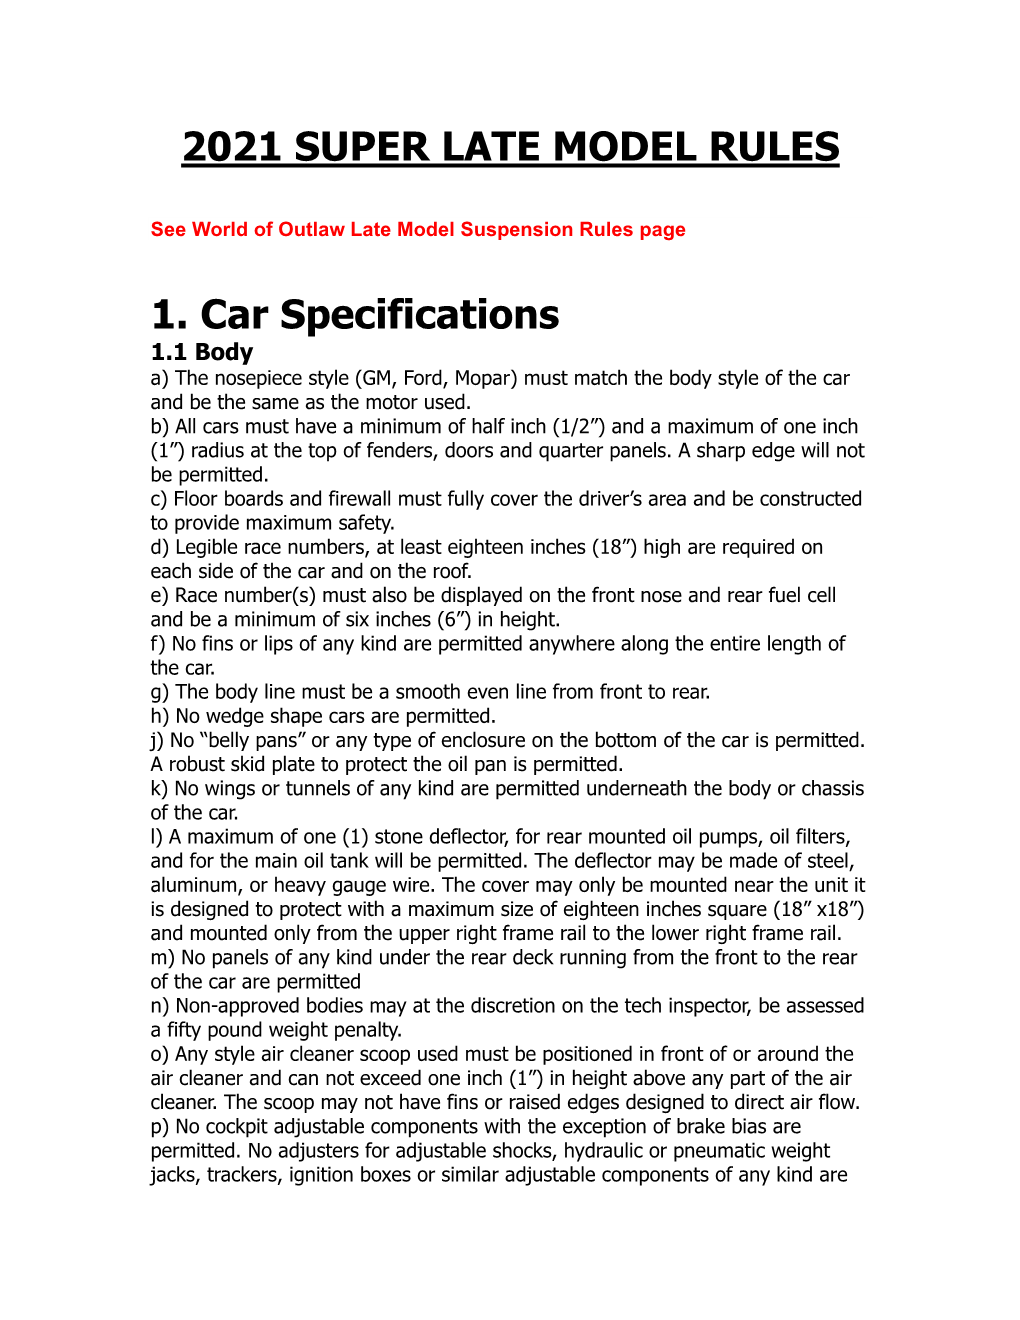 2021 SUPER LATE MODEL RULES 1. Car Specifications